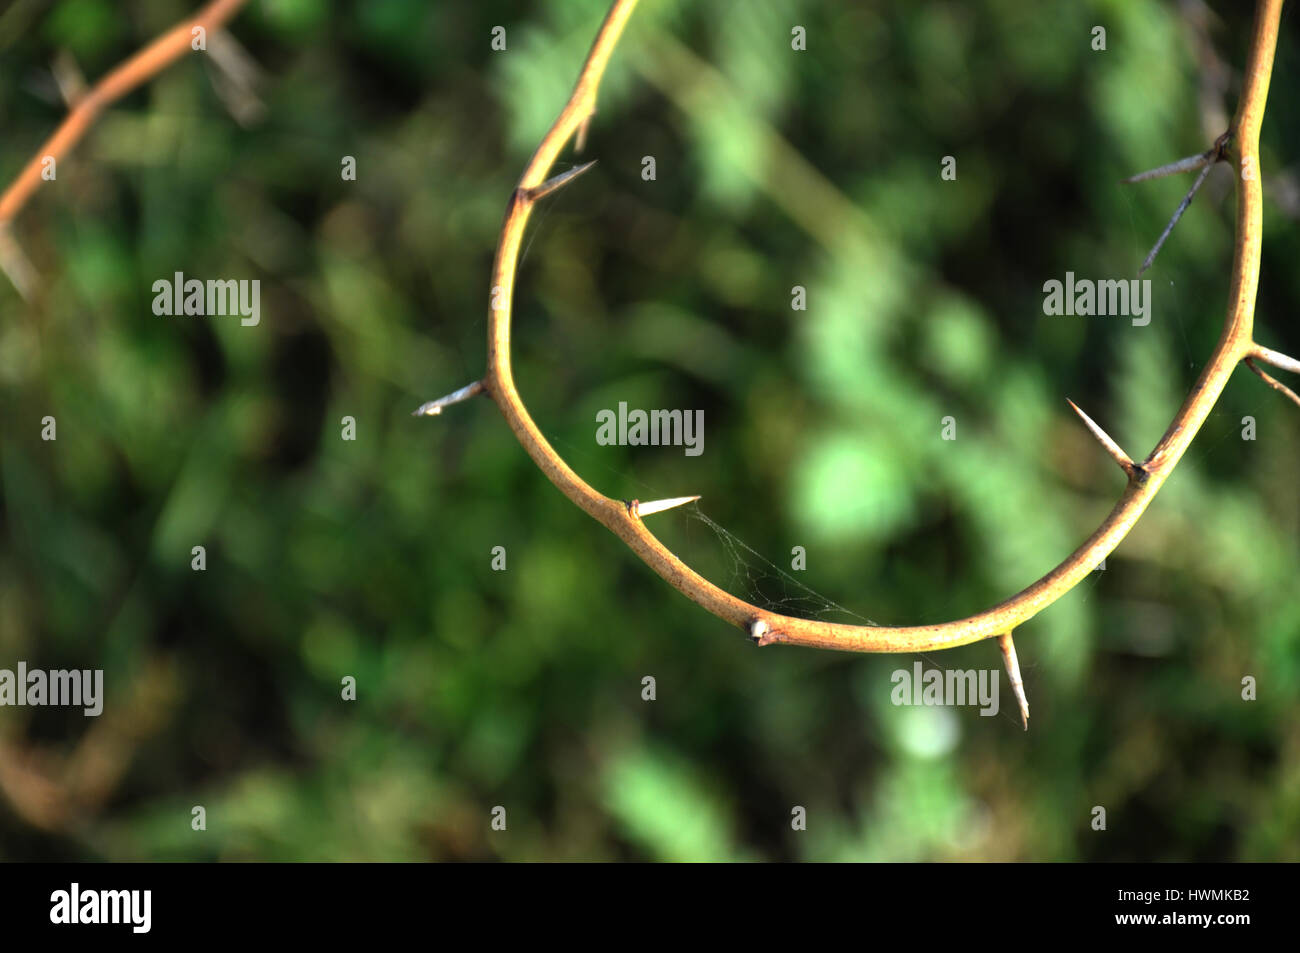 Thorns, In plant morphology, thorns, spines, and prickles (Copyright © Saji Maramon) Stock Photo